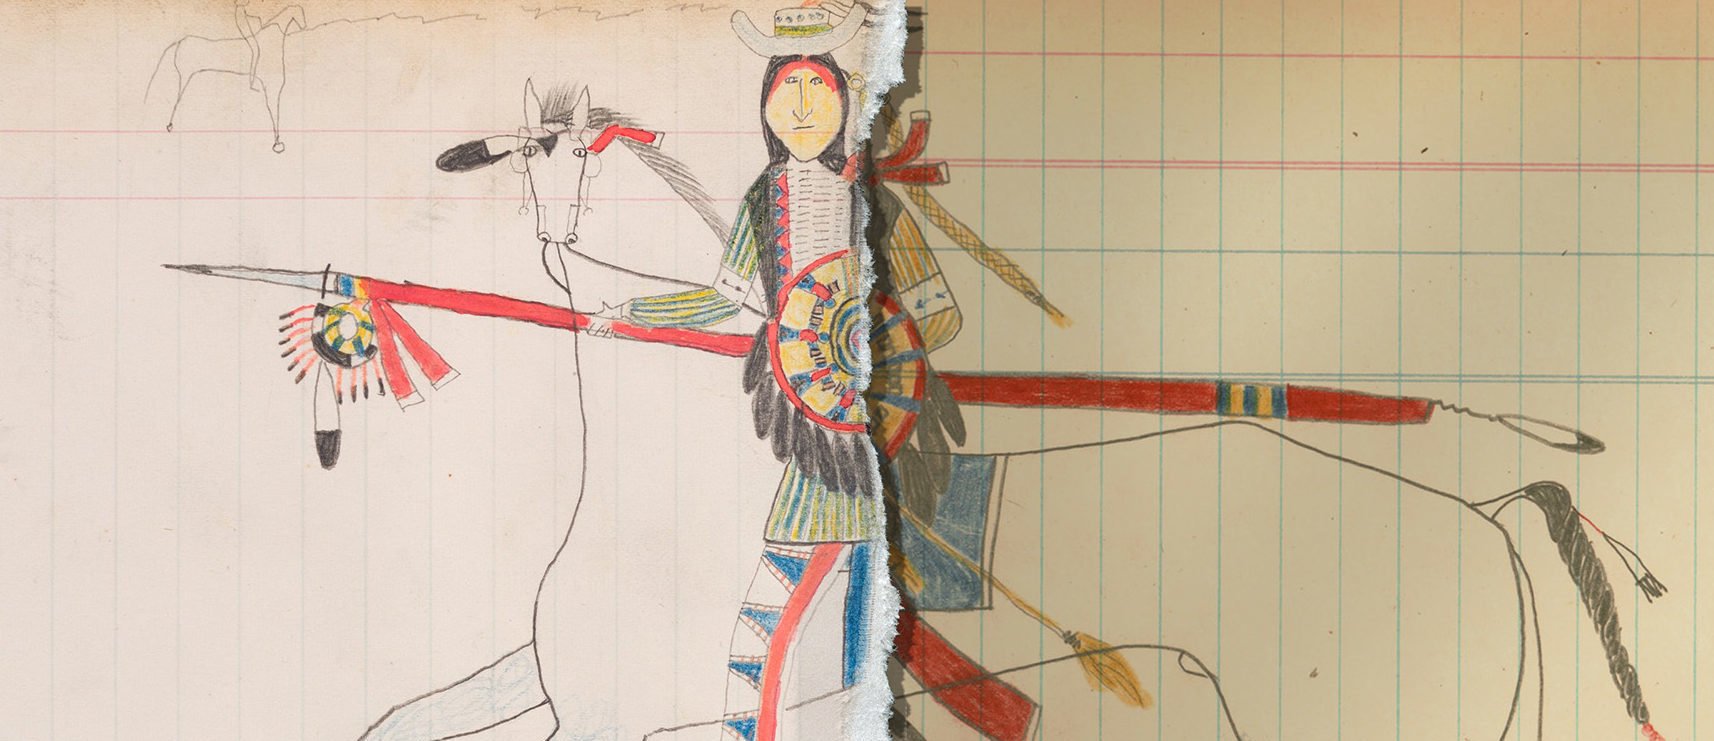 "Arapaho Dog Soldier" and it's likely source of inspiration, "Self-portrait". "Arapaho Dog Soldier" is one of approximately 100 pieces displayed at the Lander Pioneer Museum's show "Tribal Warrior Art". Experts say the piece is probably a fake.